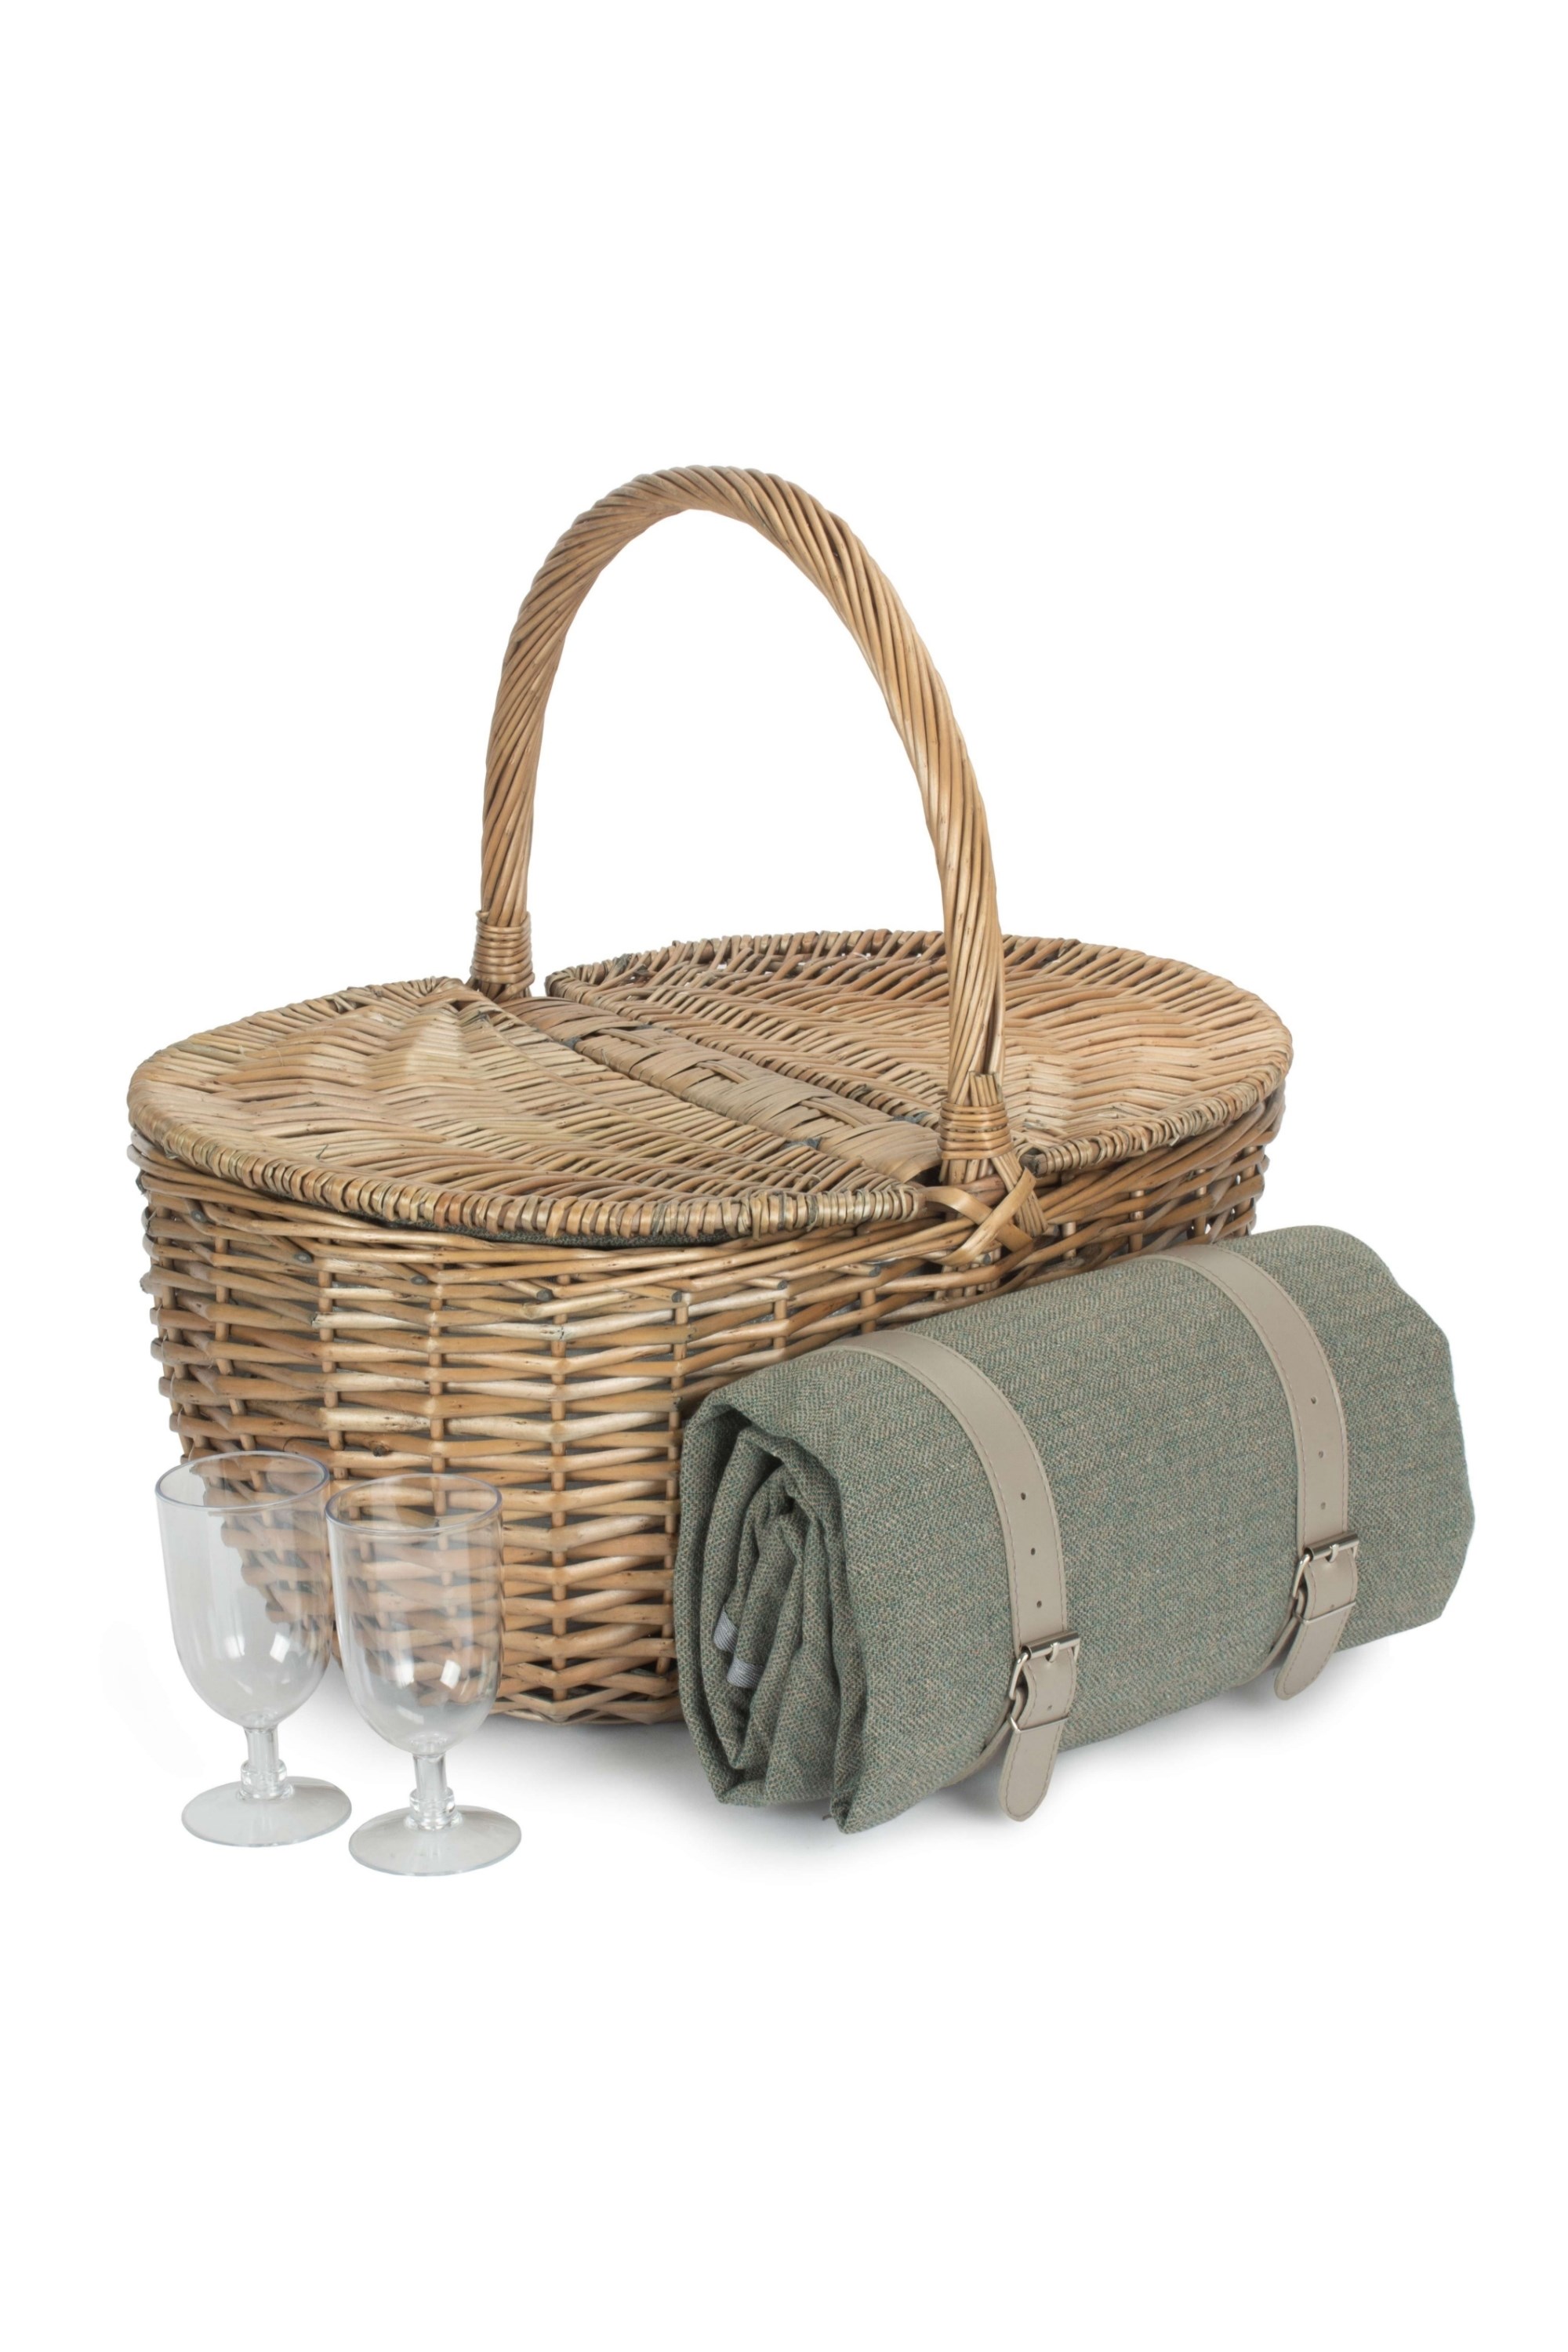 Oval Grey Sage 2 Person Fitted Picnic Basket -